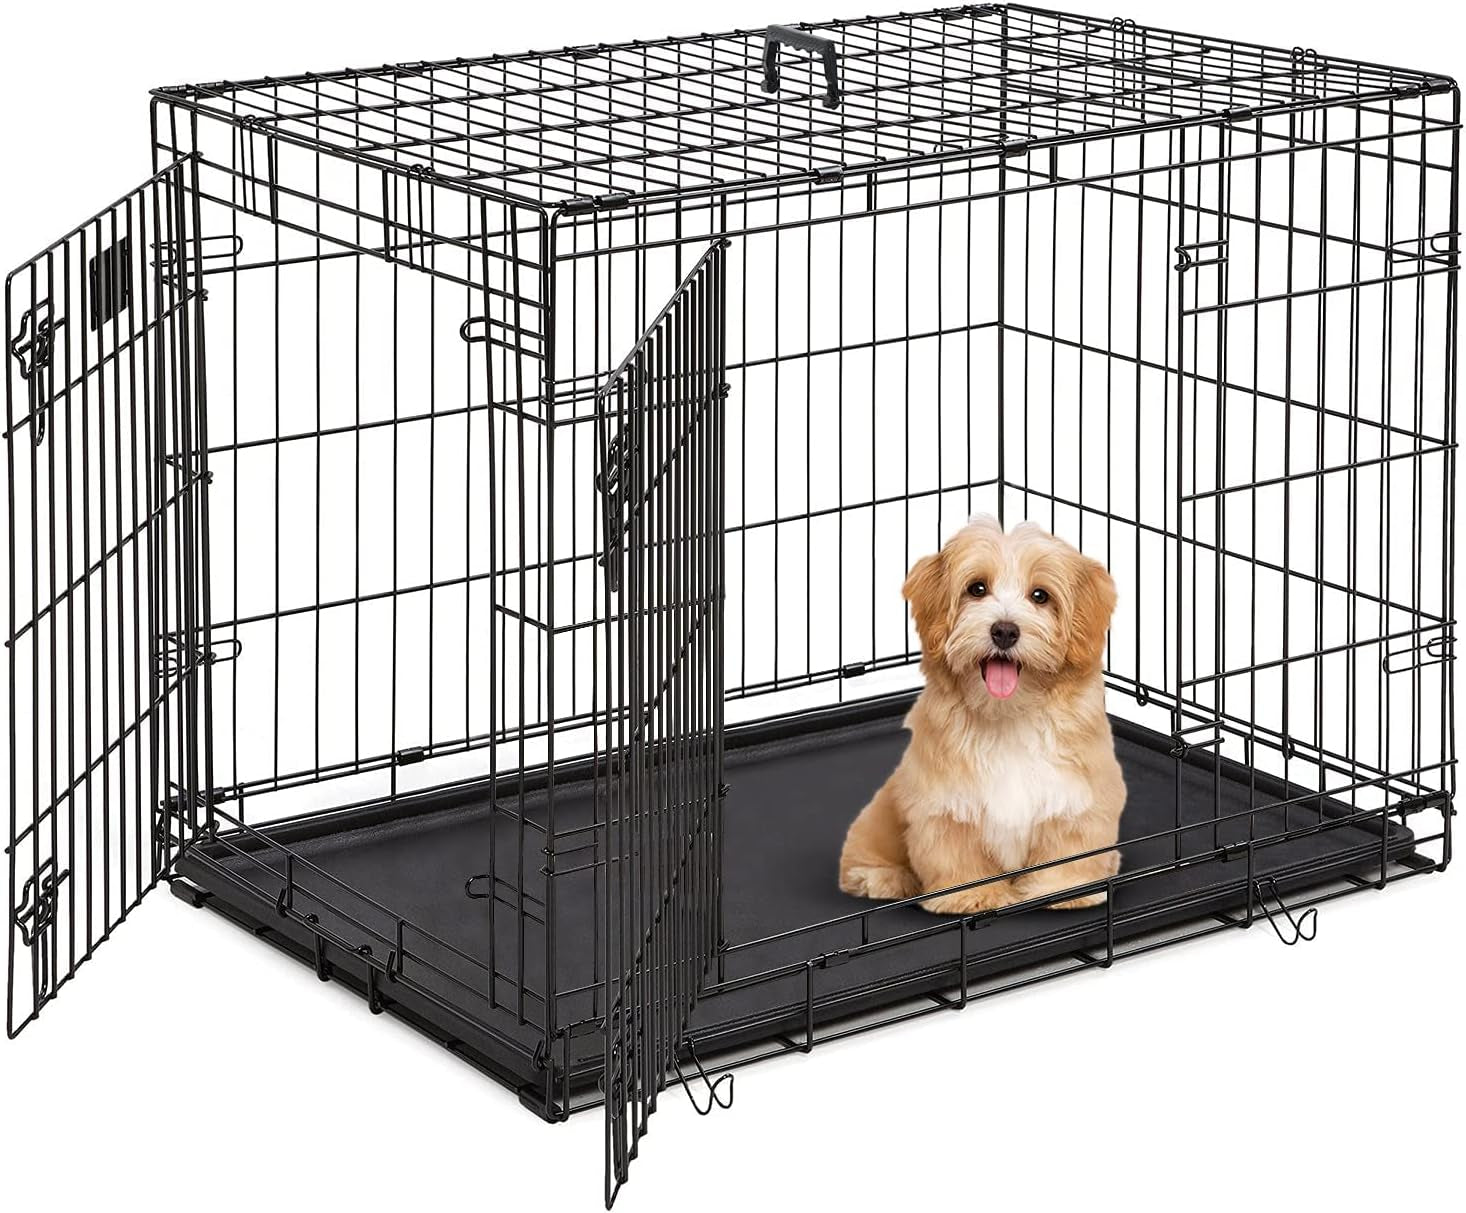 Dog Cage Dog Crate Dog Kennel Folding Metal Pet Crate for Small/Medium/Large Dogs 36 Inch Double Doors Puppy Kennel with Divider Panel Indoor Outdoor Travel Use(Black)